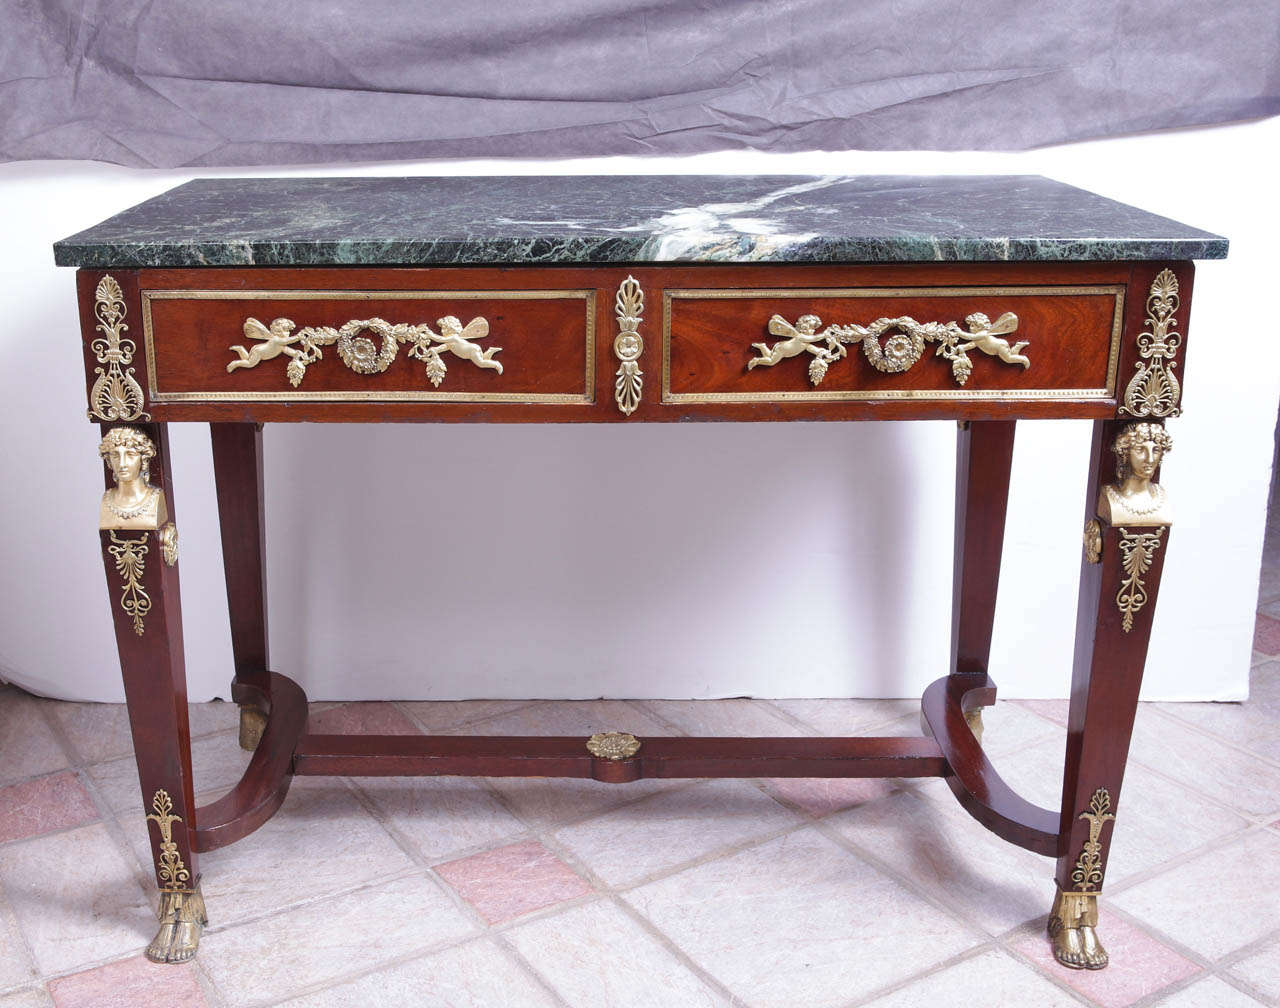 19th century Empire Napoleon III gilt bronze and marble topped console with two drawers and bronze on both sides.